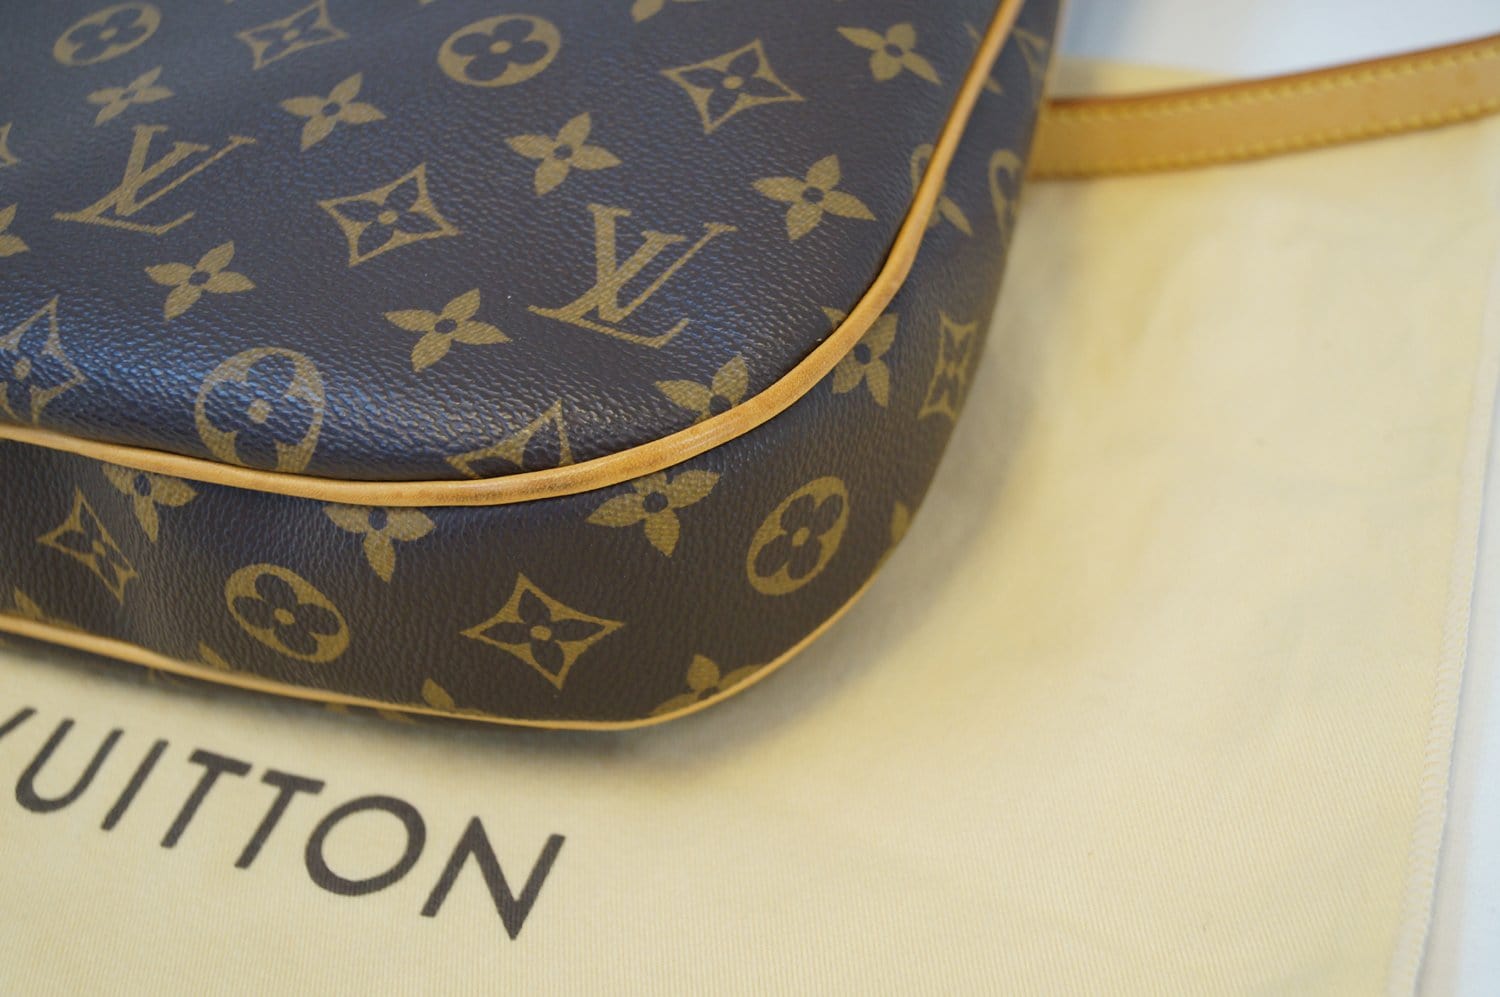 🧚🏻Louis Vuitton Odeon GM monogram 🧚🏻$900 usd invoicef and shipped  🧚🏻In good condition with minor signs of use only 🧚🏻Comes with -  Grancha Kauzo Japan Second Hand Lux